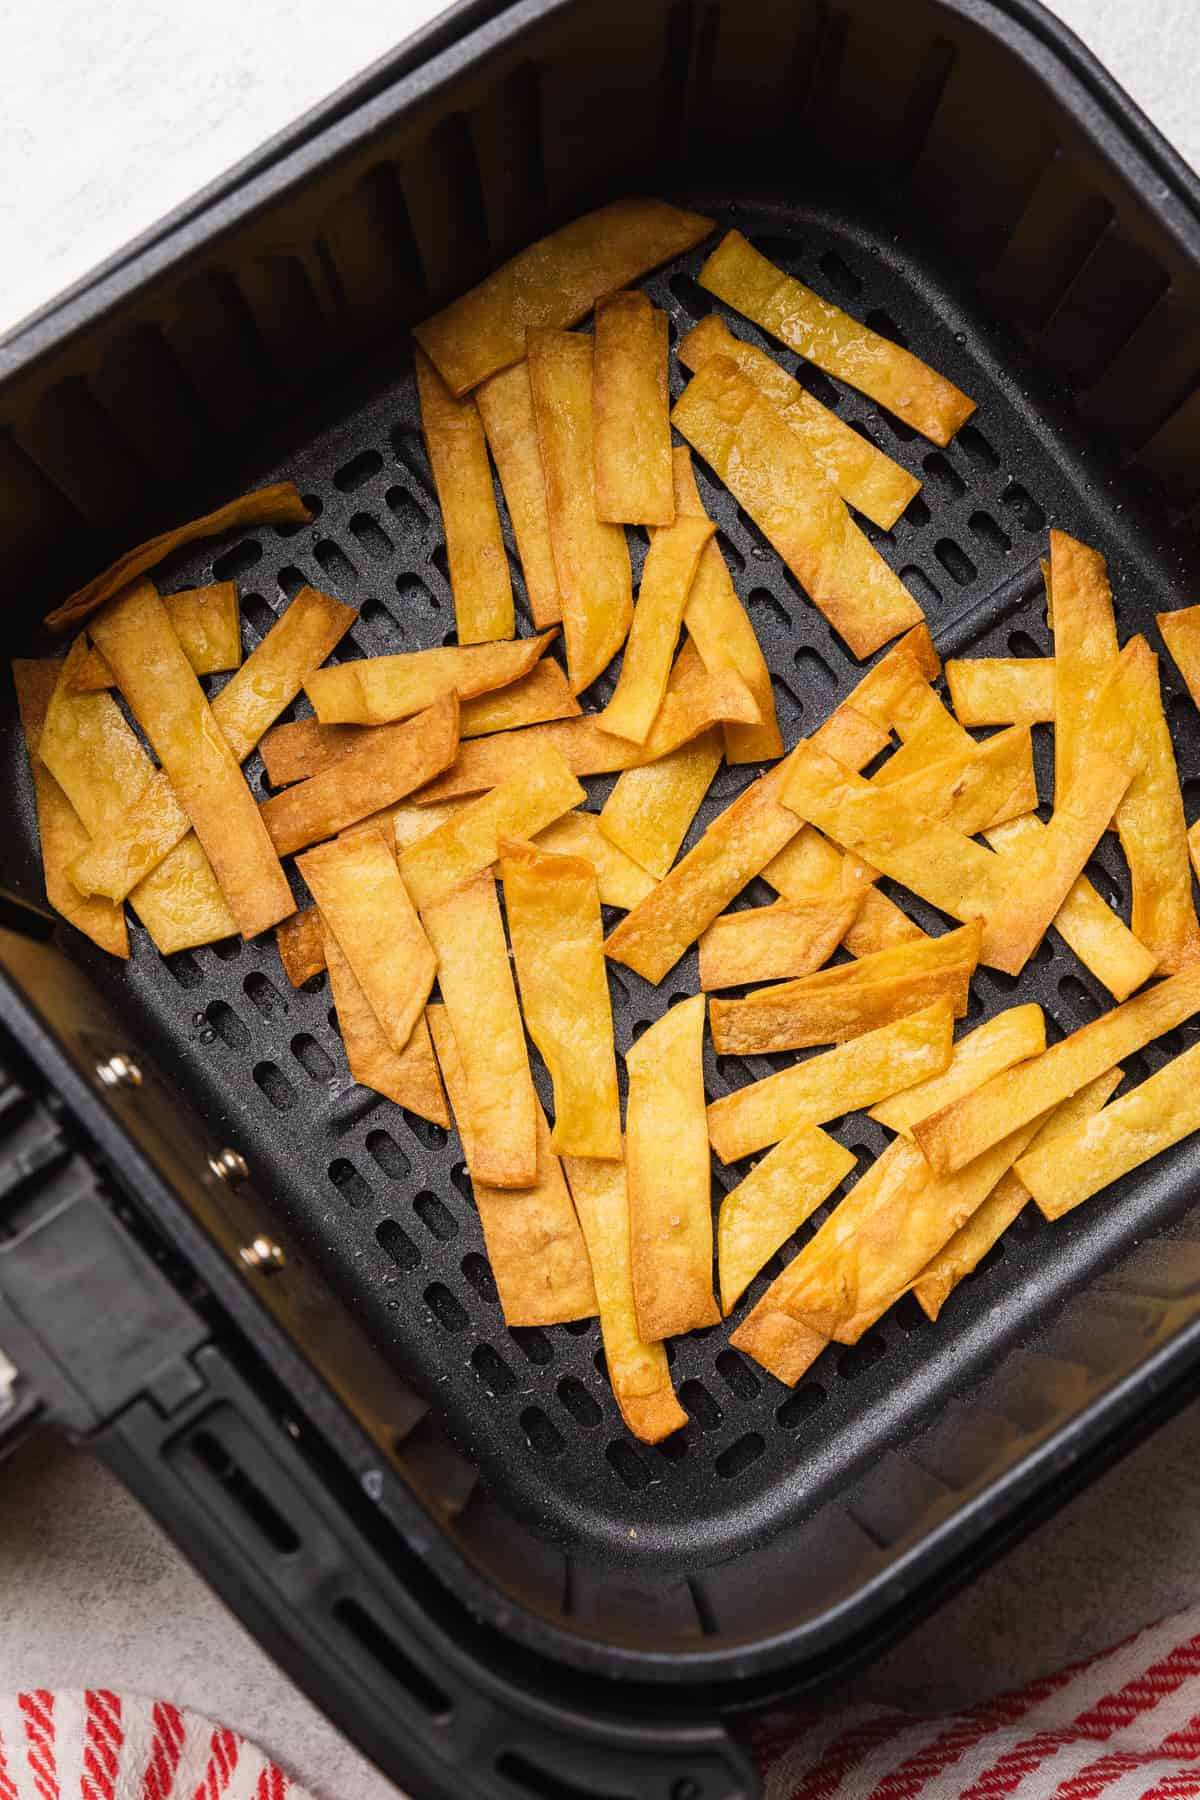 Corn tortilla strips cooked to a light golden brown.